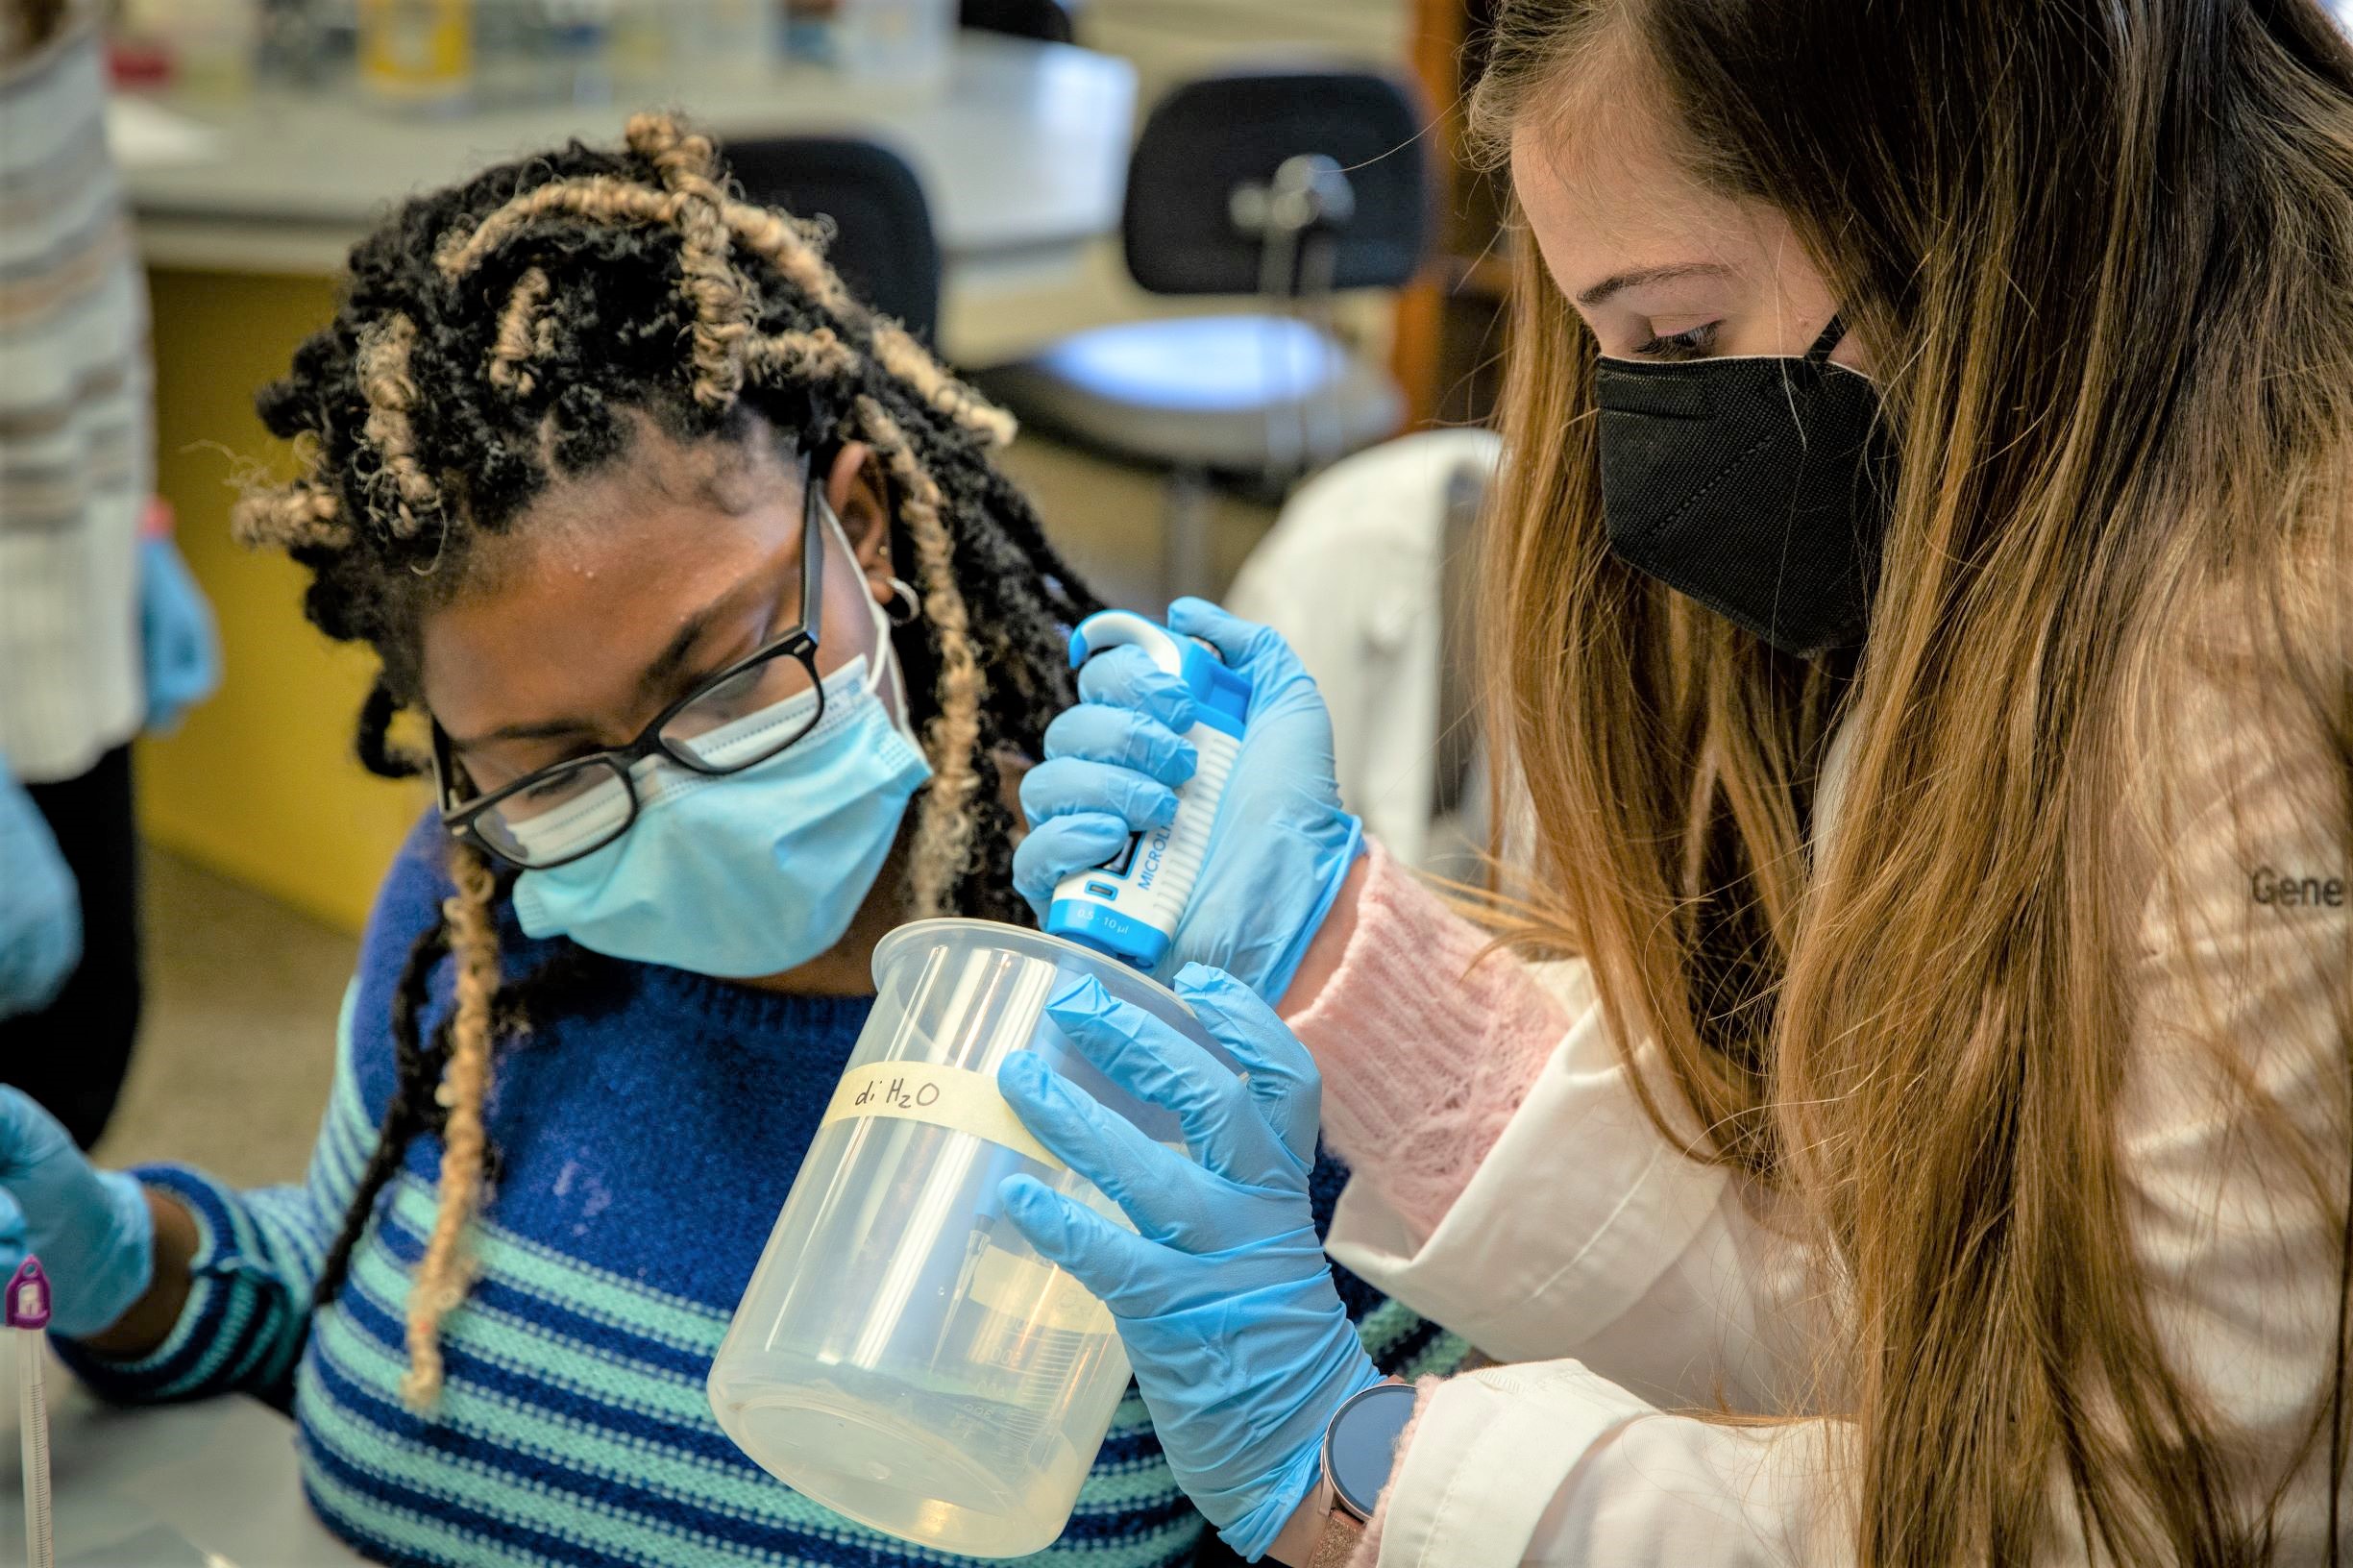 “It has been incredible to see the delight in the eyes of the intelligent young women at the Salem Academy as they discover the wonder and power of CRISPR,” said Amanda Hewes, MS, education program manager for the Gene Editing Institute, which developed CRISPR in a Box™.